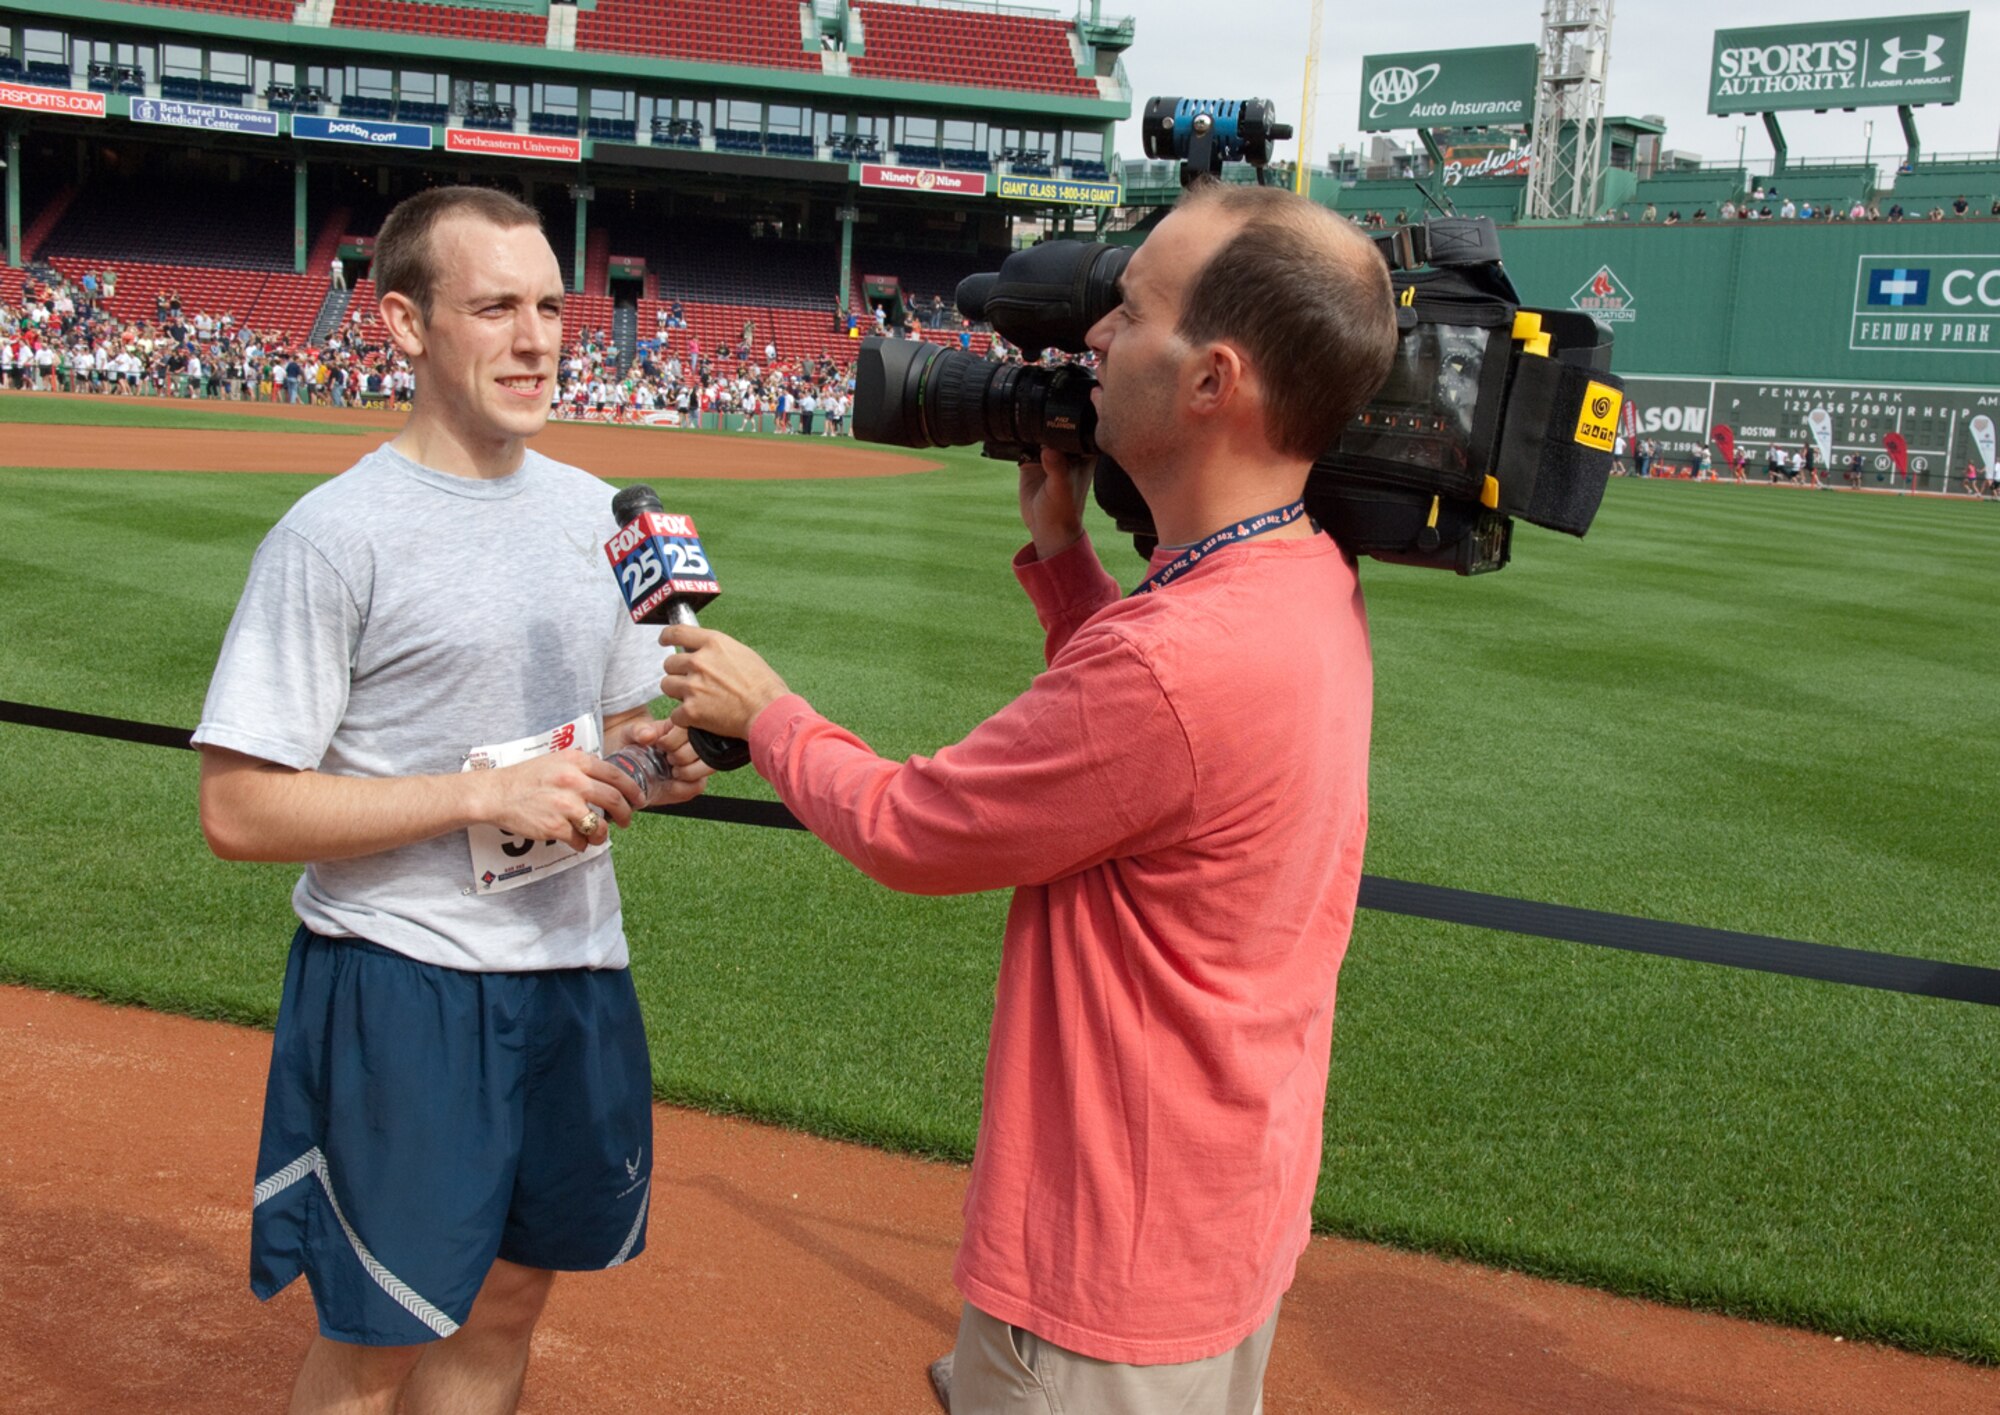 BOSTON – 1st Lt. Ronald Jenkins, 350th Electronic Systems Group, is interviewed after finishing 14th of more than 2,000 participants in the Run to Home Base 9K race at Fenway Park. The race benefitted the Home Base Program, which offers treatment and support to veterans of Operations Iraqi and Enduring Freedom who suffer from traumatic brain injuries and deployment-related stress disorders.  (U.S. Air Force photo by Rick Berry)